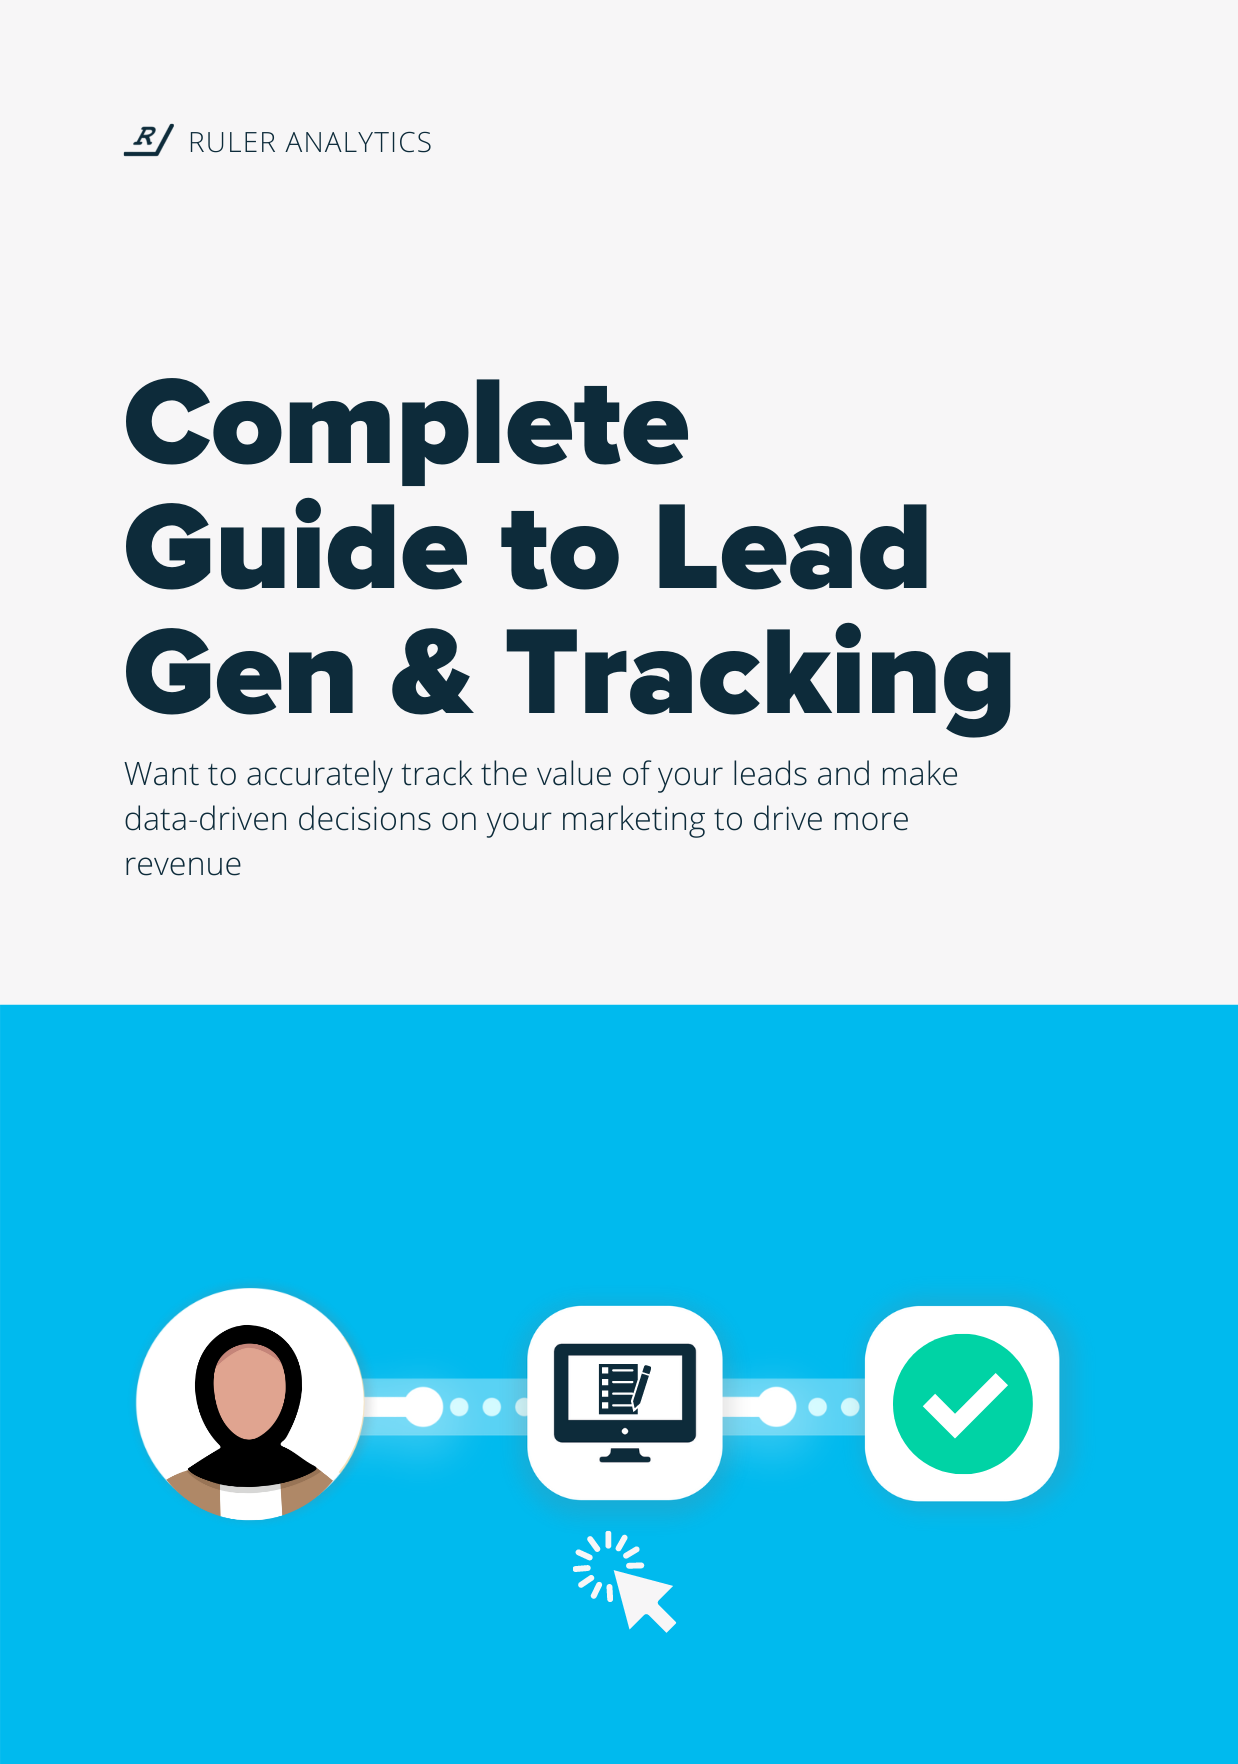 Guide to Lead Generation & Tracking